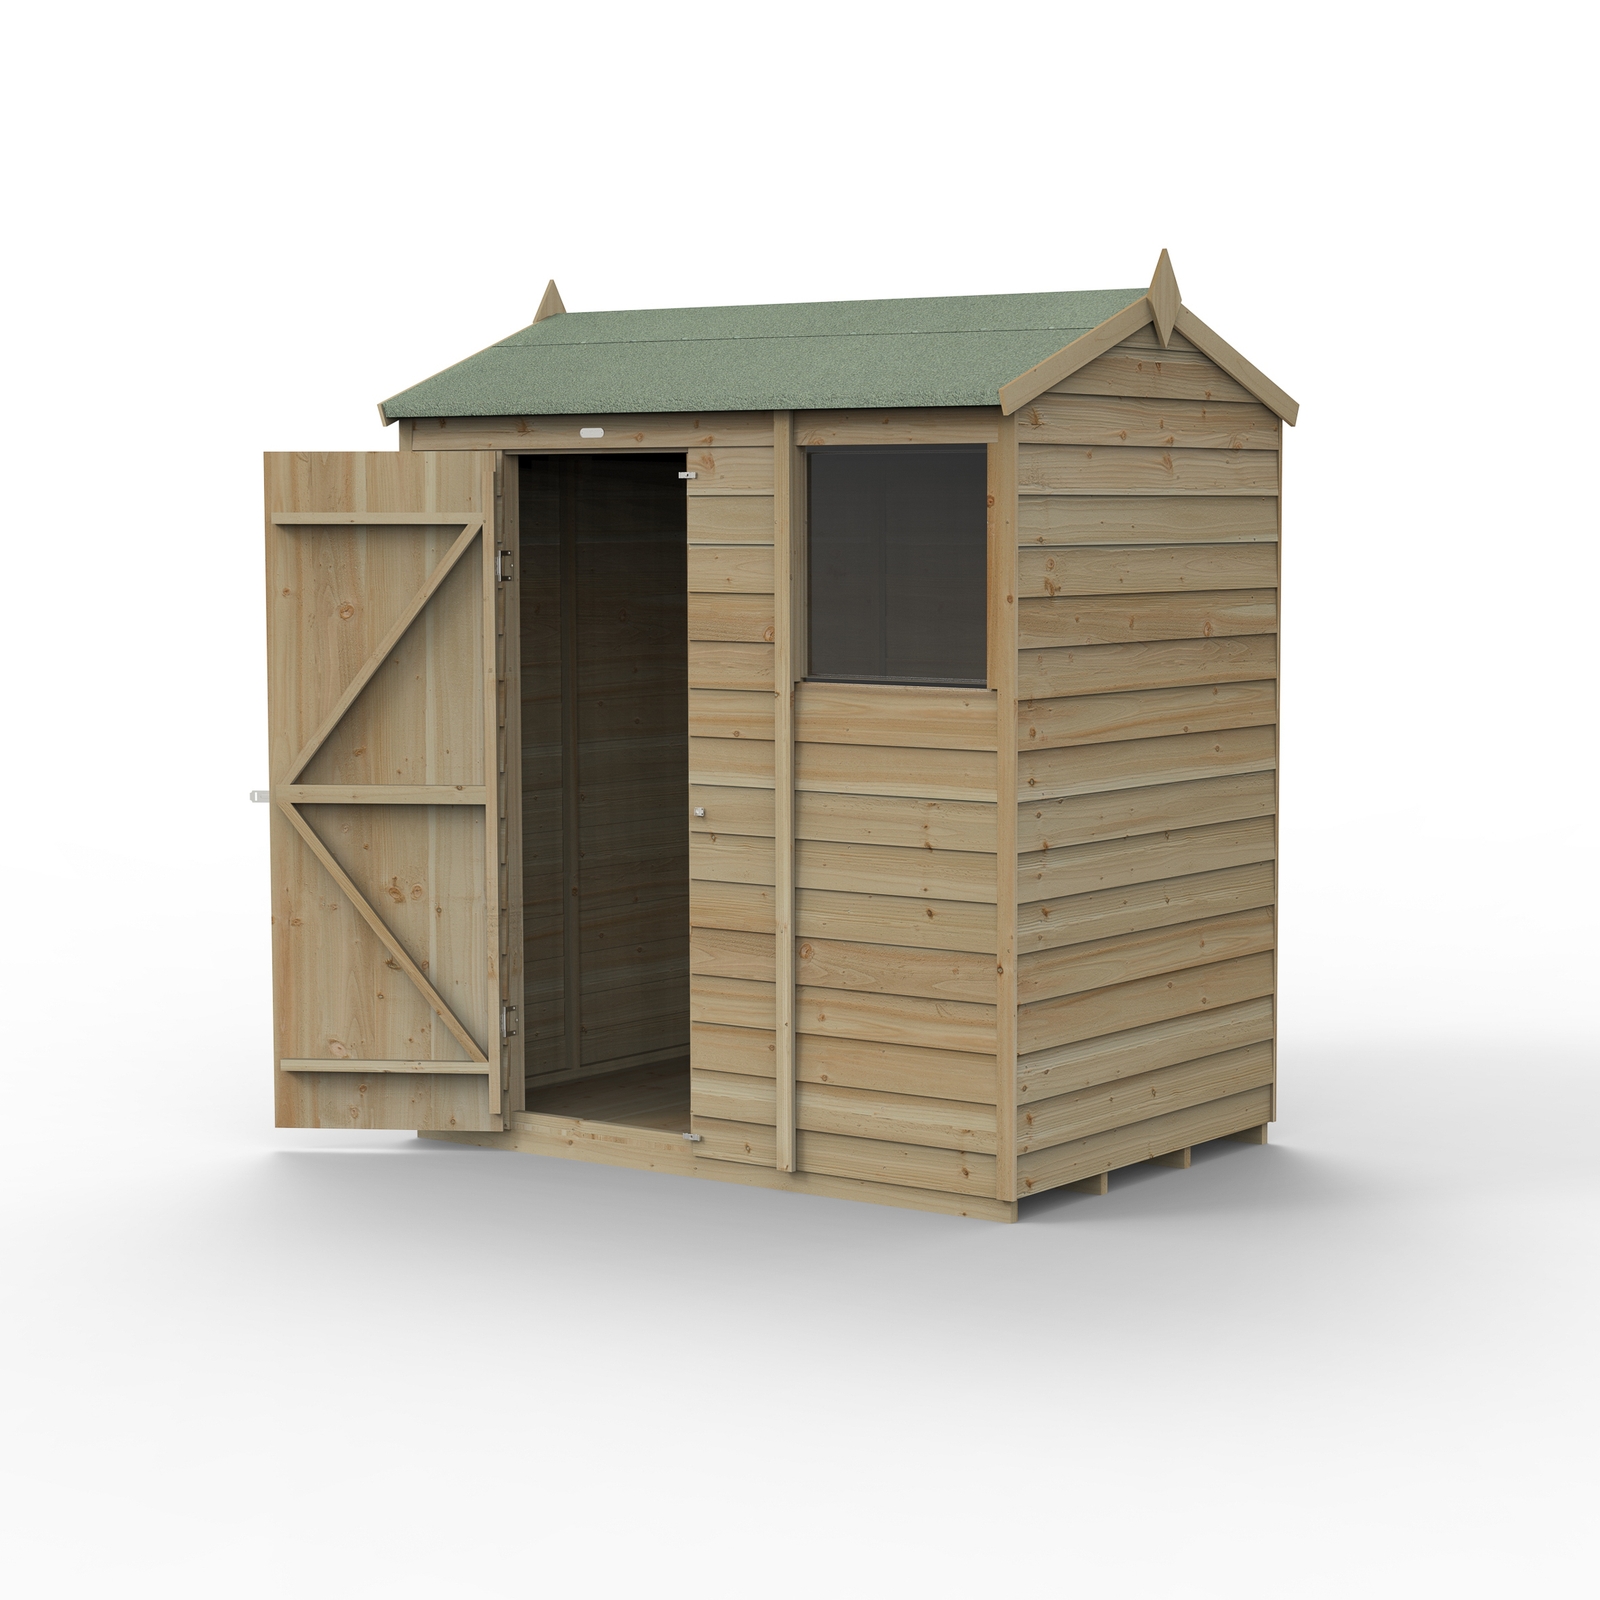 Forest Garden 4LIFE Reverse Apex Shed 6 x 4ft - Single Door 1 Window (Including Installation)